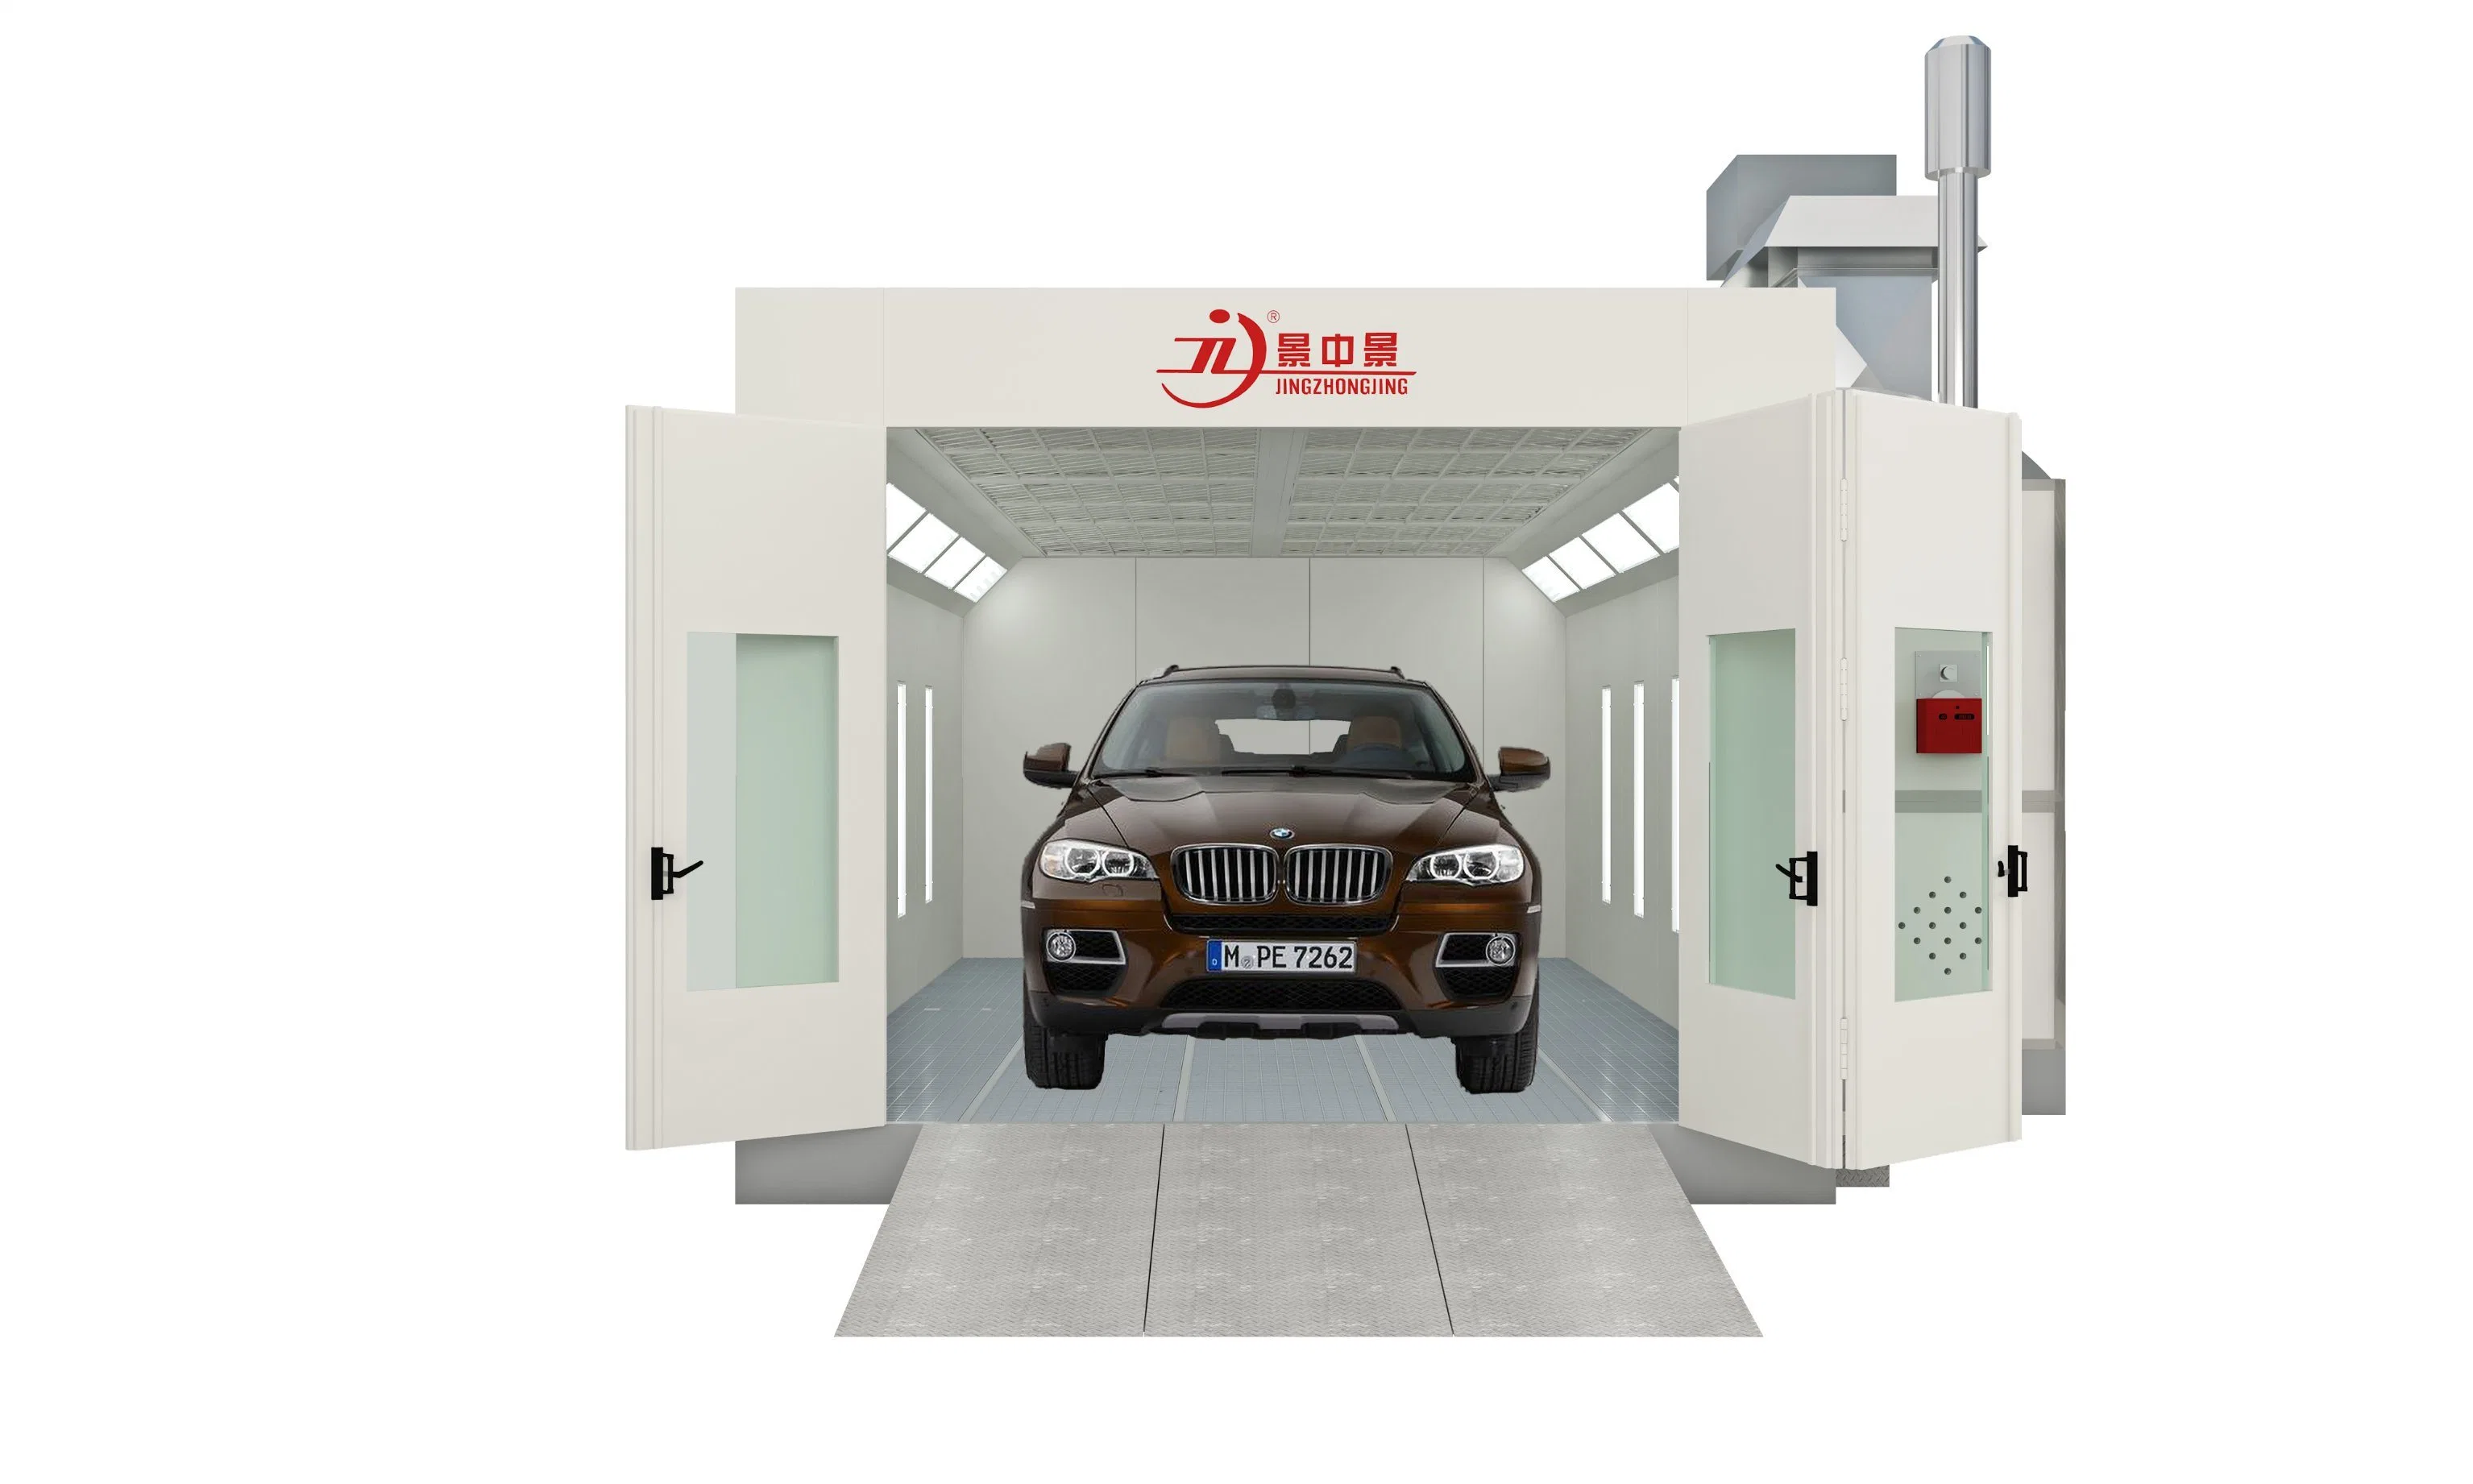 Diesel Heating Auto Painting Equipment Automotive Car Spray Paint Booth